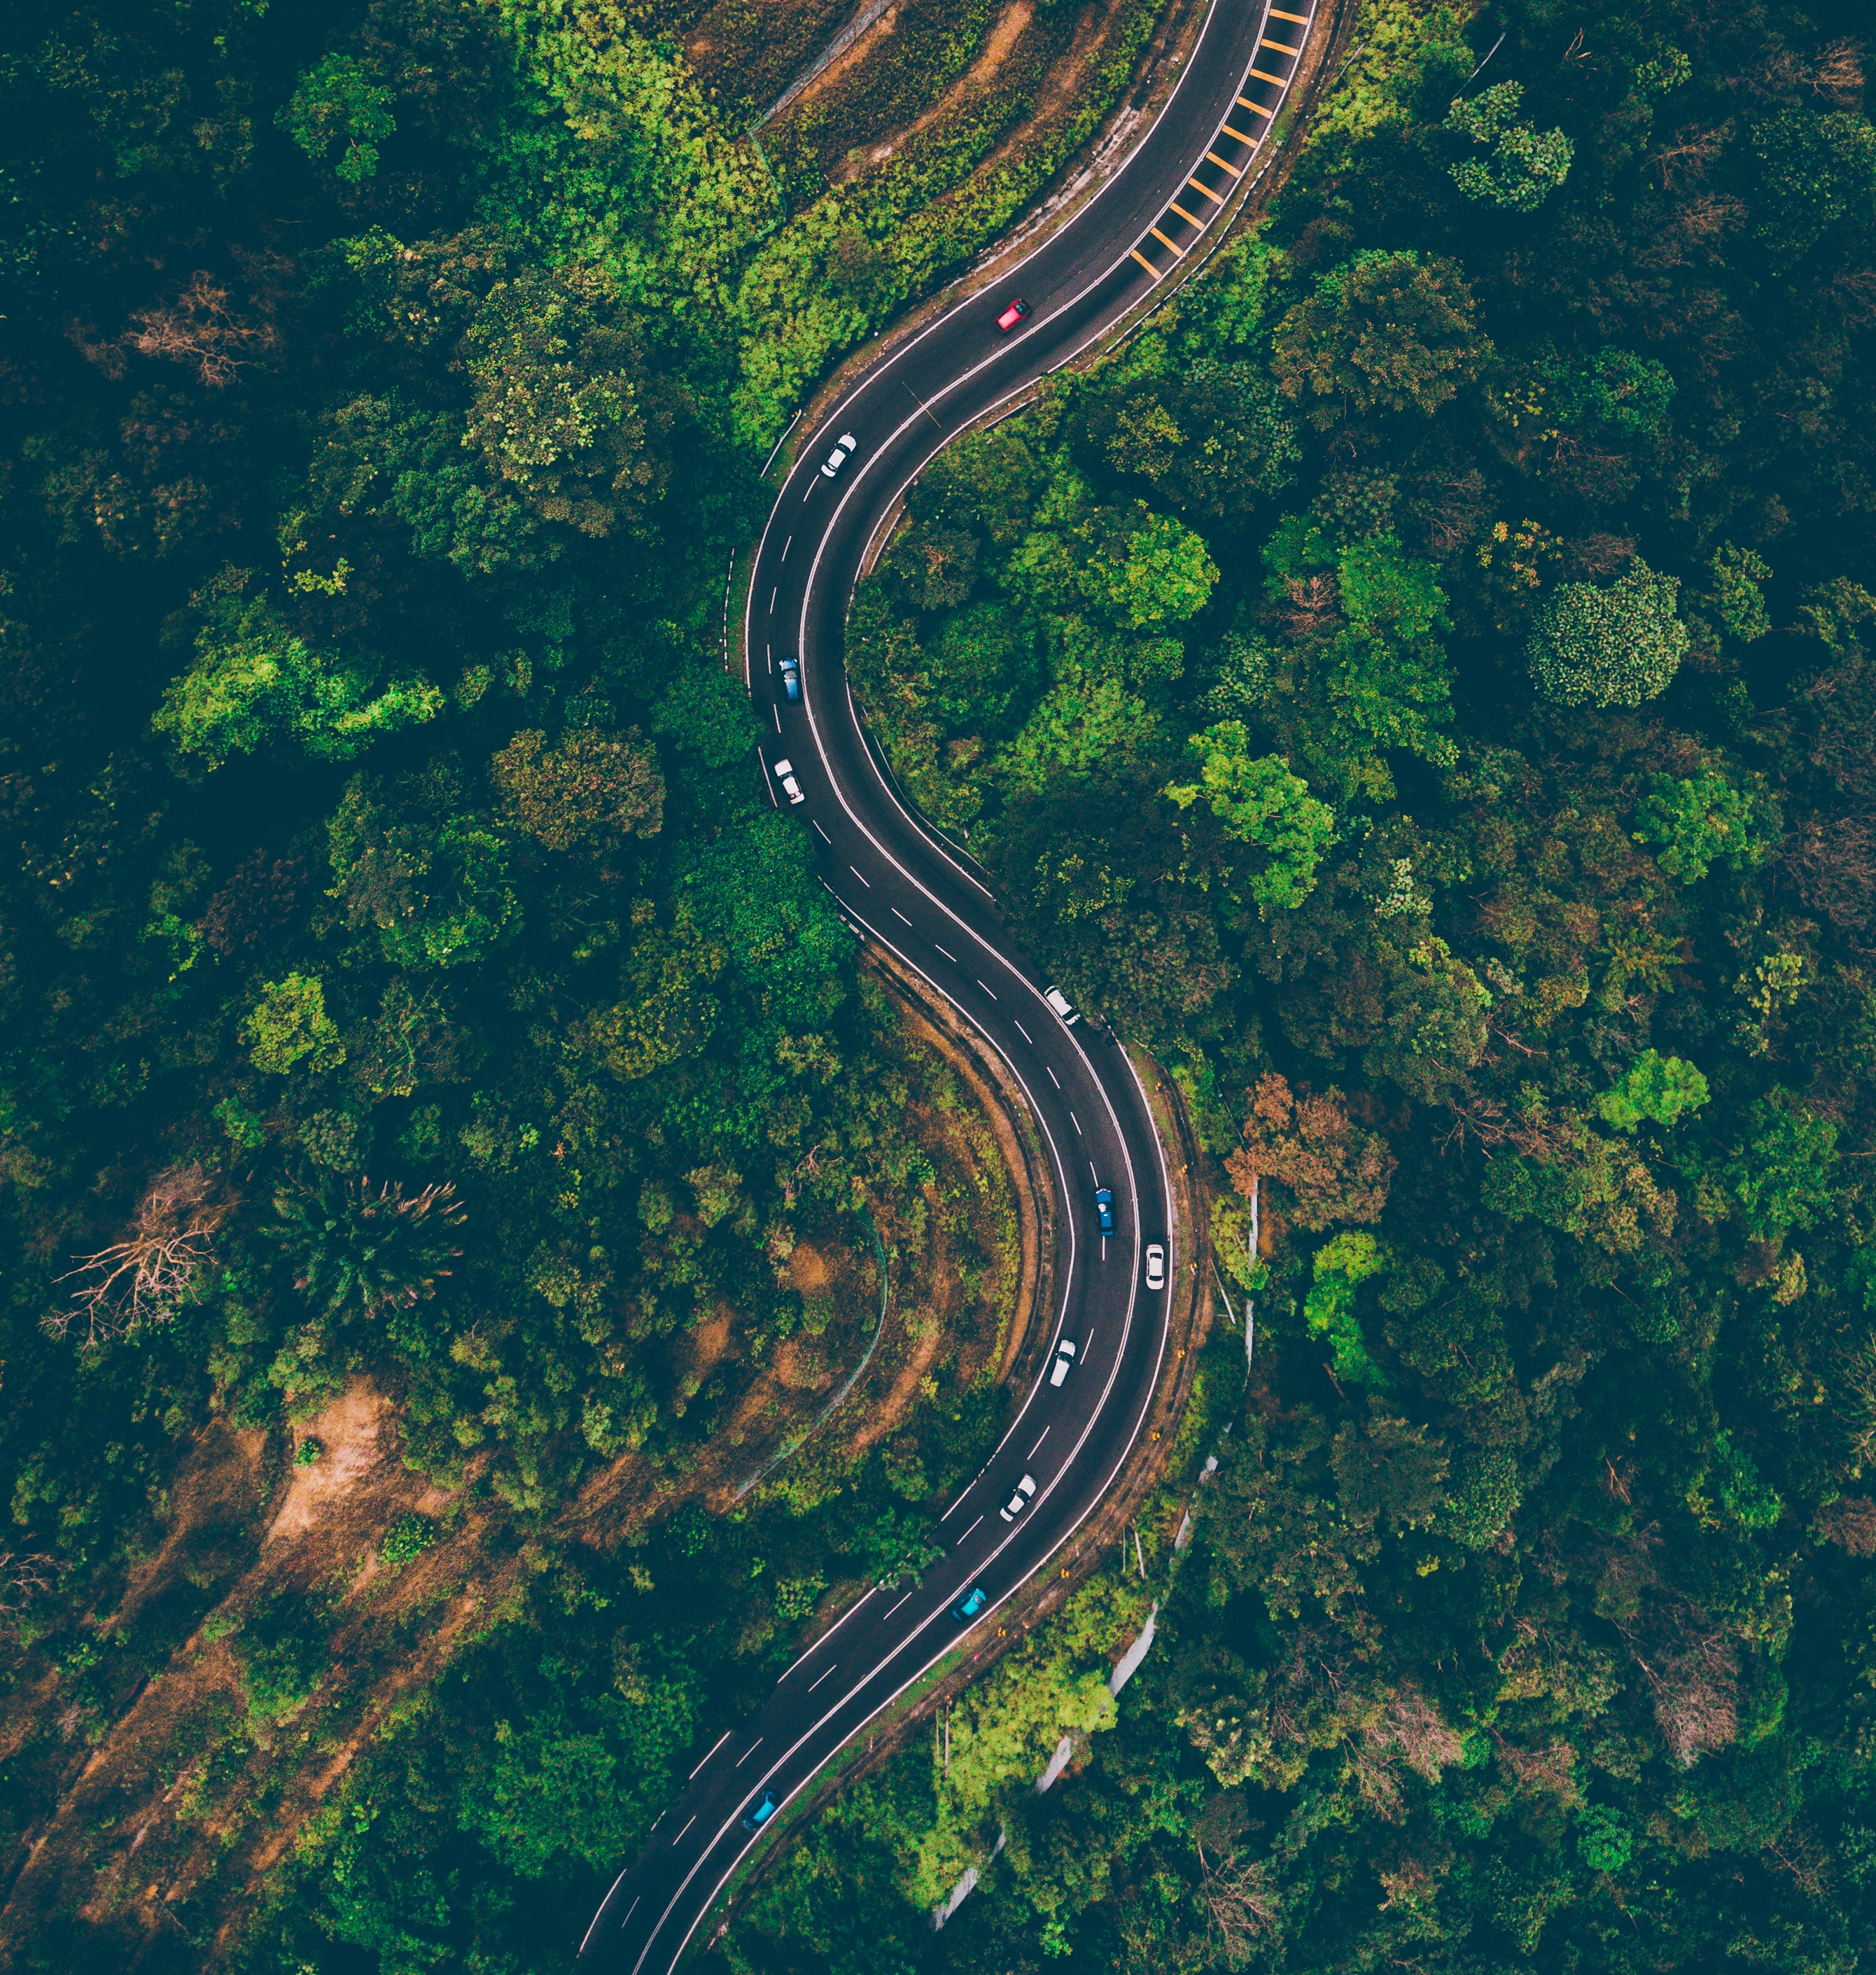 Free HD road, sinuous, nature, trees, view from above, winding, malaysia, batang kali